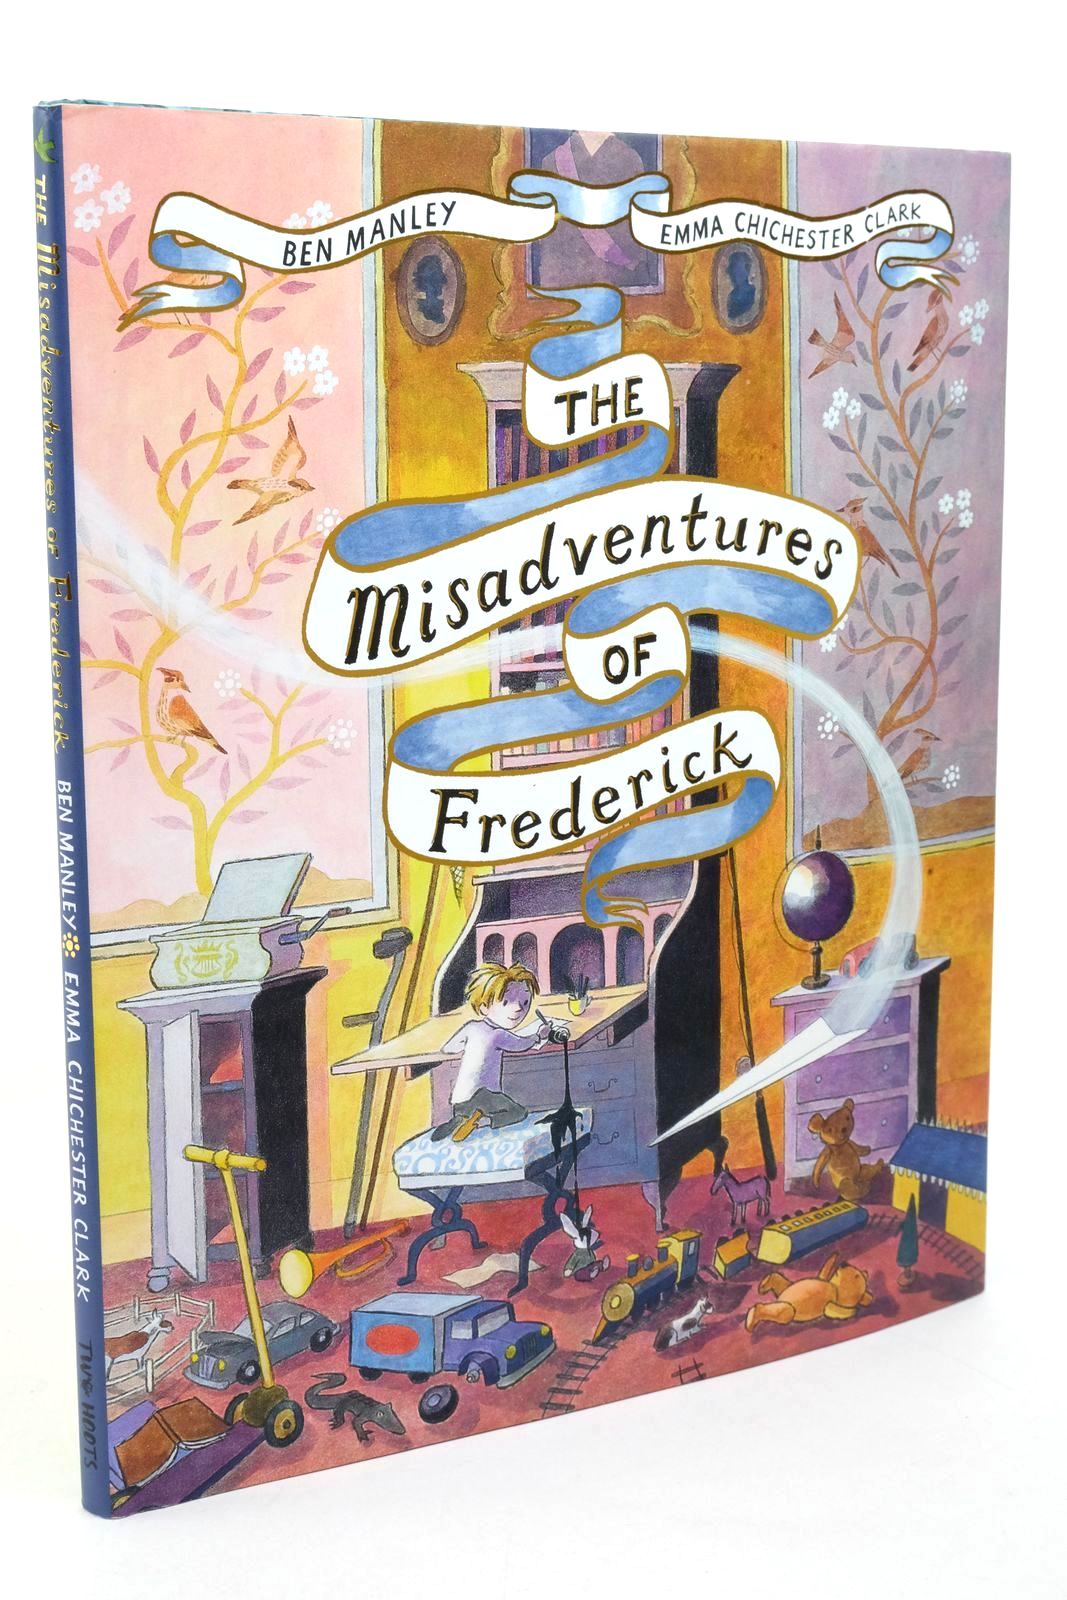 Photo of THE MISADVENTURES OF FREDERICK written by Manley, Ben illustrated by Clark, Emma Chichester published by Two Hoots (STOCK CODE: 1322755)  for sale by Stella & Rose's Books